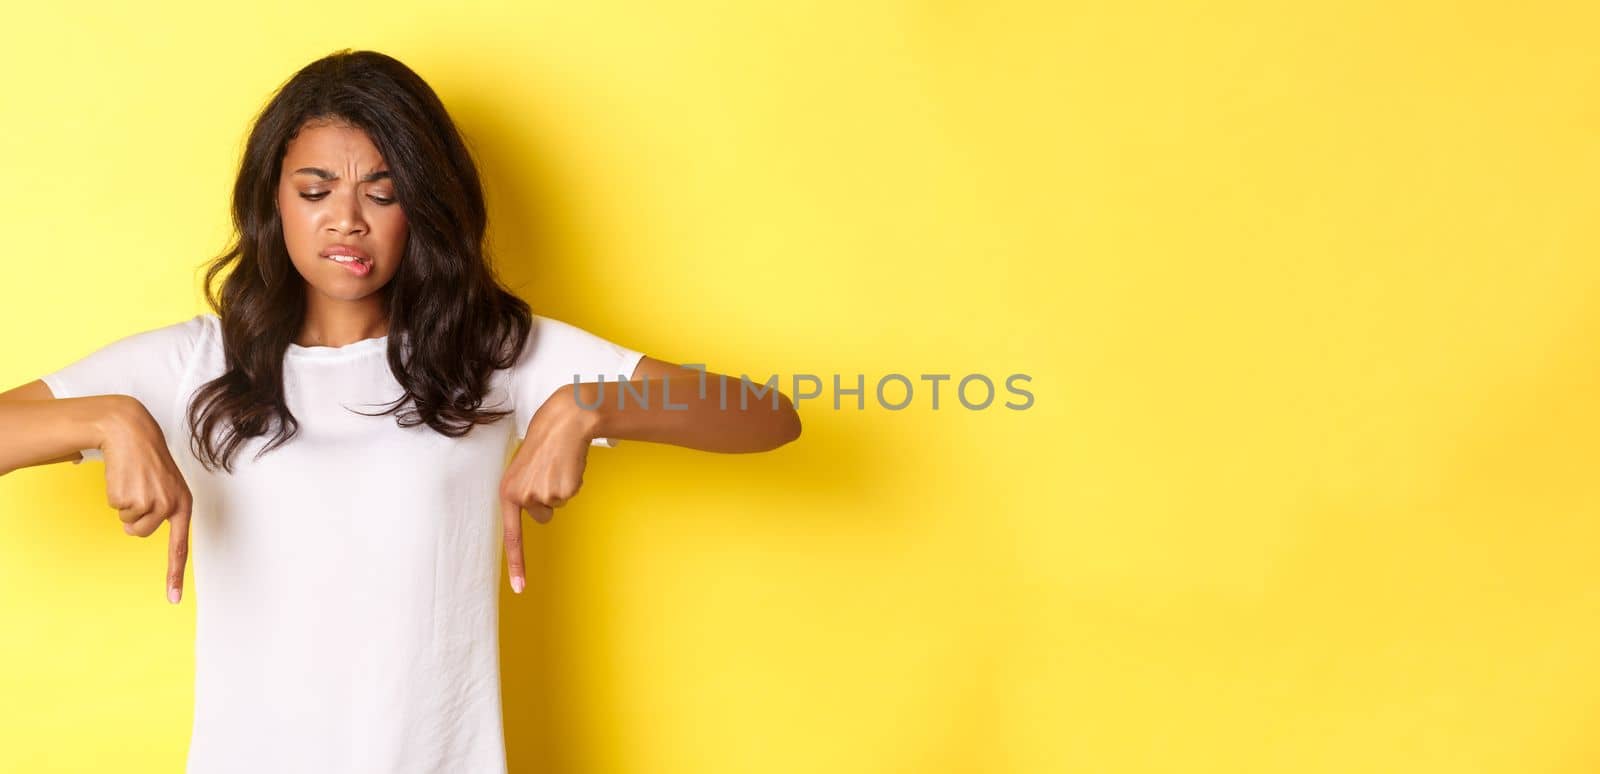 Portrait of doubtful and skeptical african-american girl in white t-shirt, frowning and pointing fingers down at something strange of unpleasant, standing over yellow background.